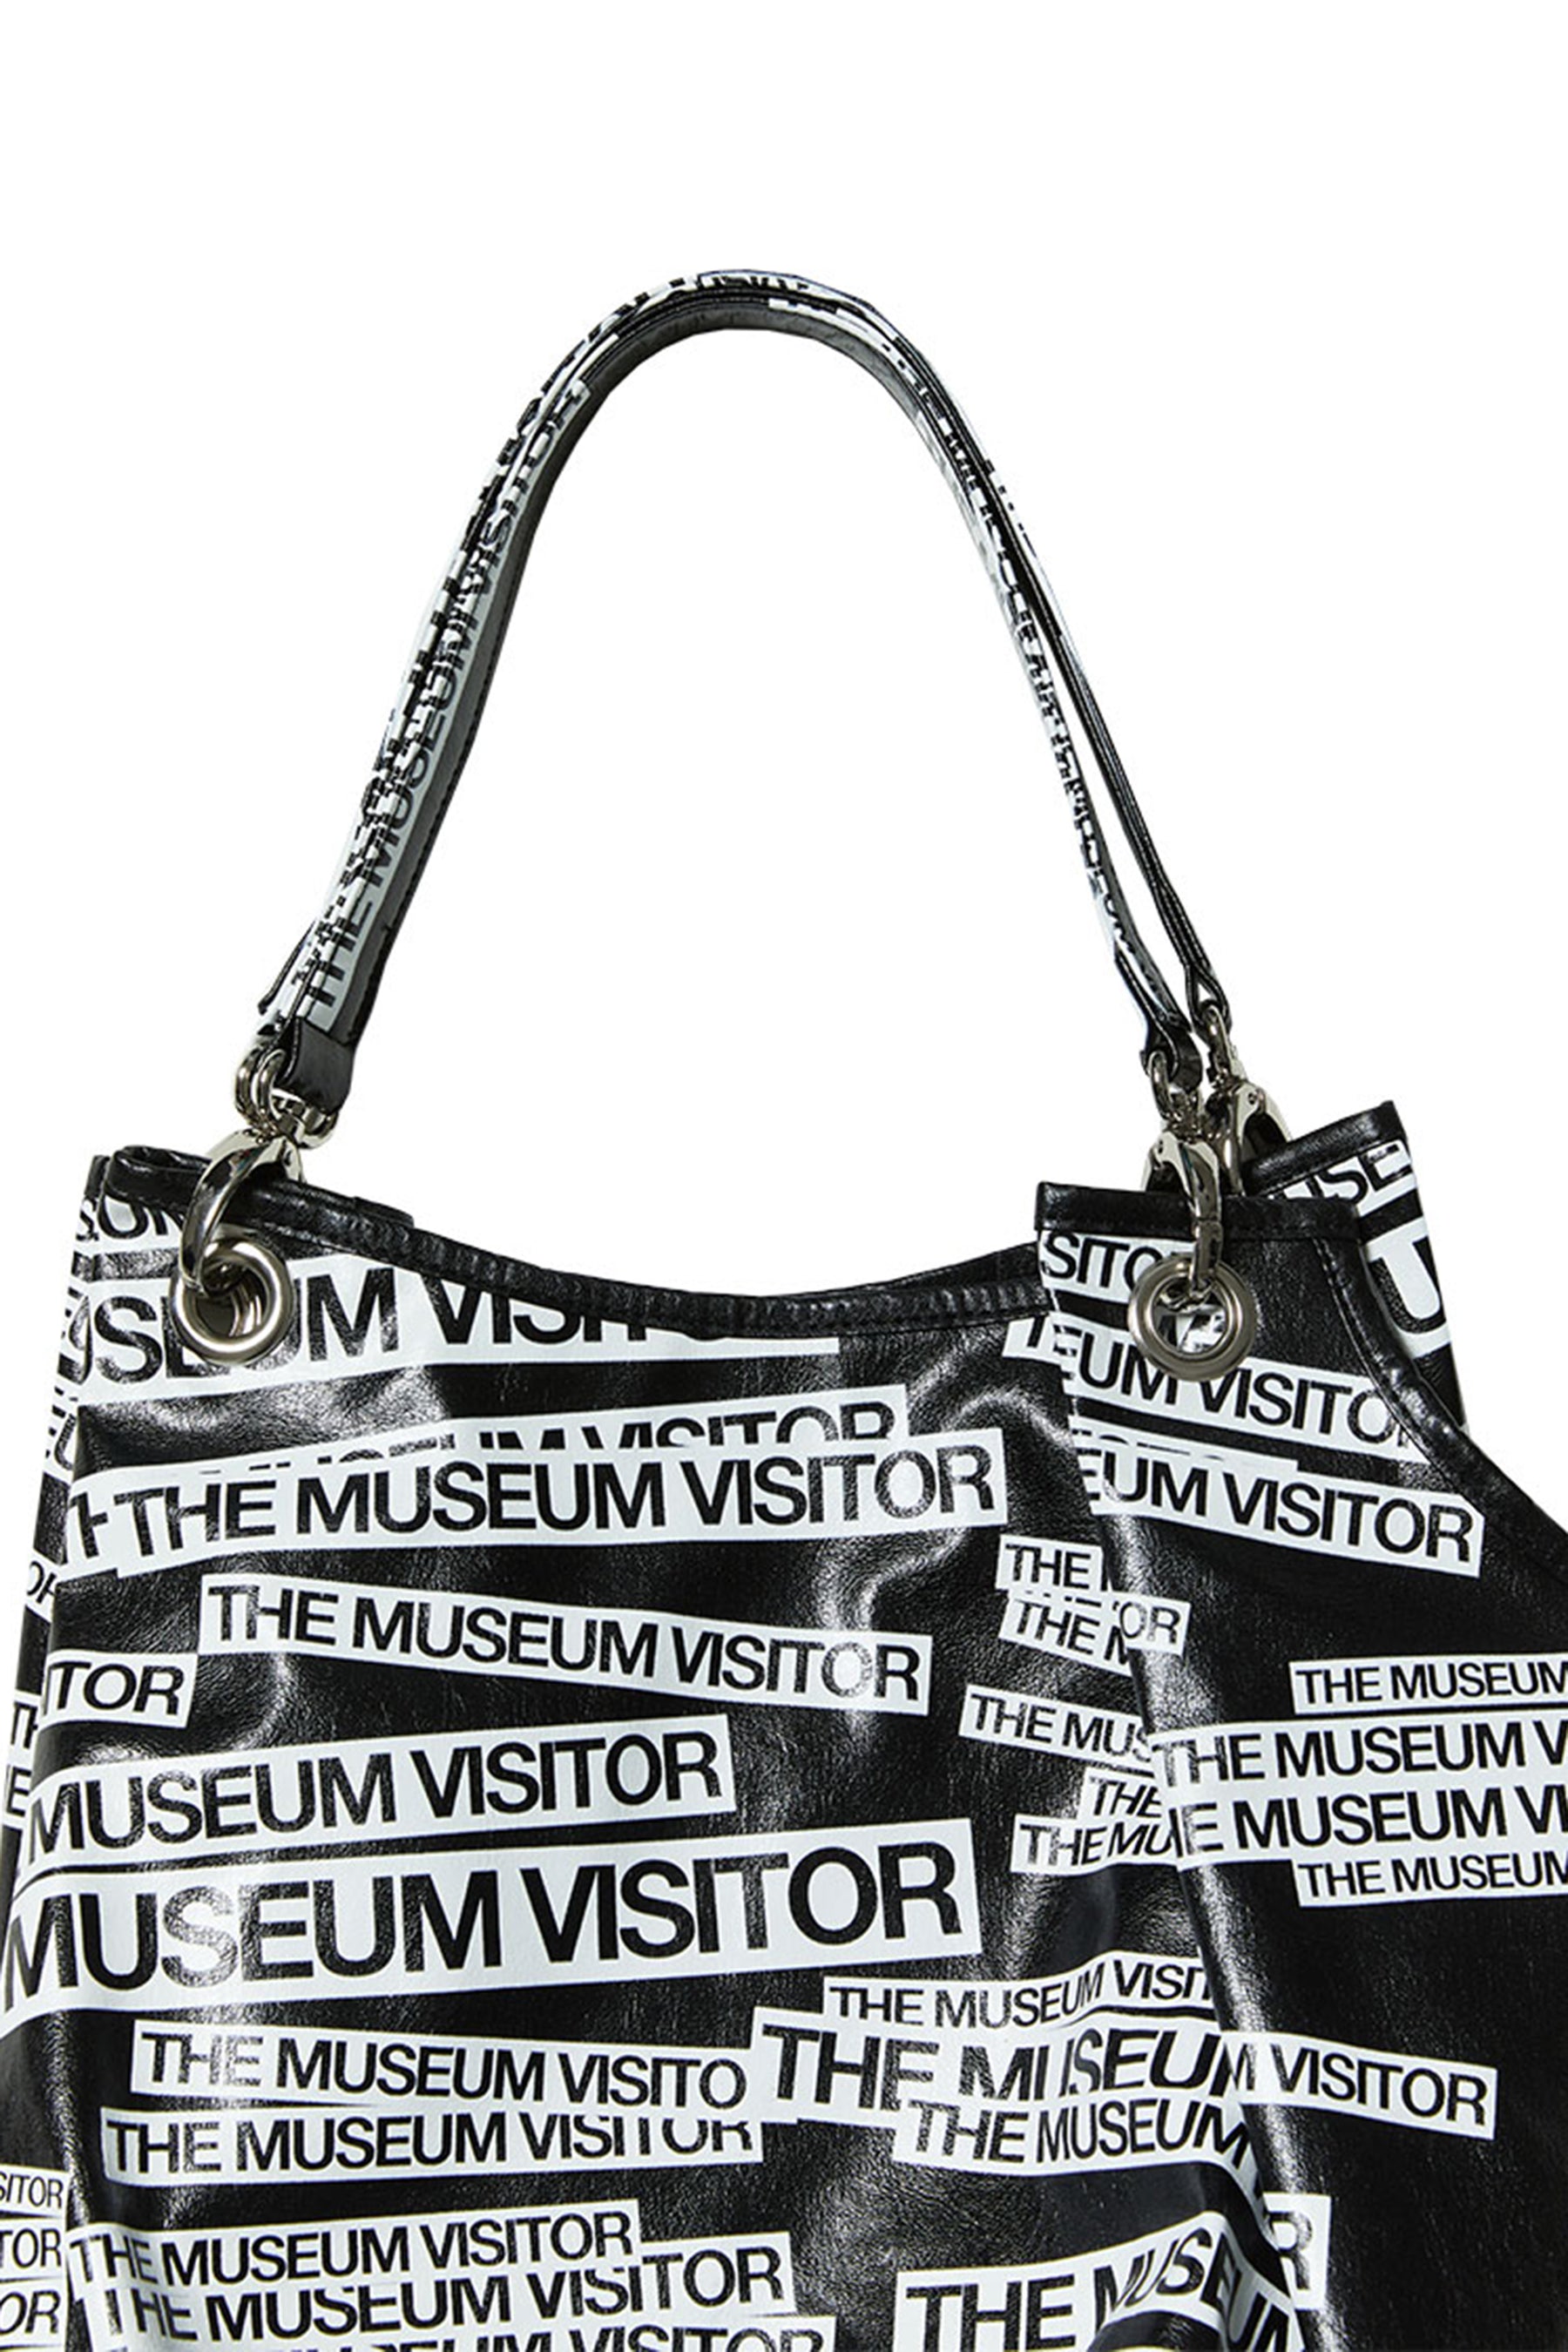 THE MUSEUM VISITOR SS23 THE MUSEUM VISITOR LOGO PRINTED TOTEBAG